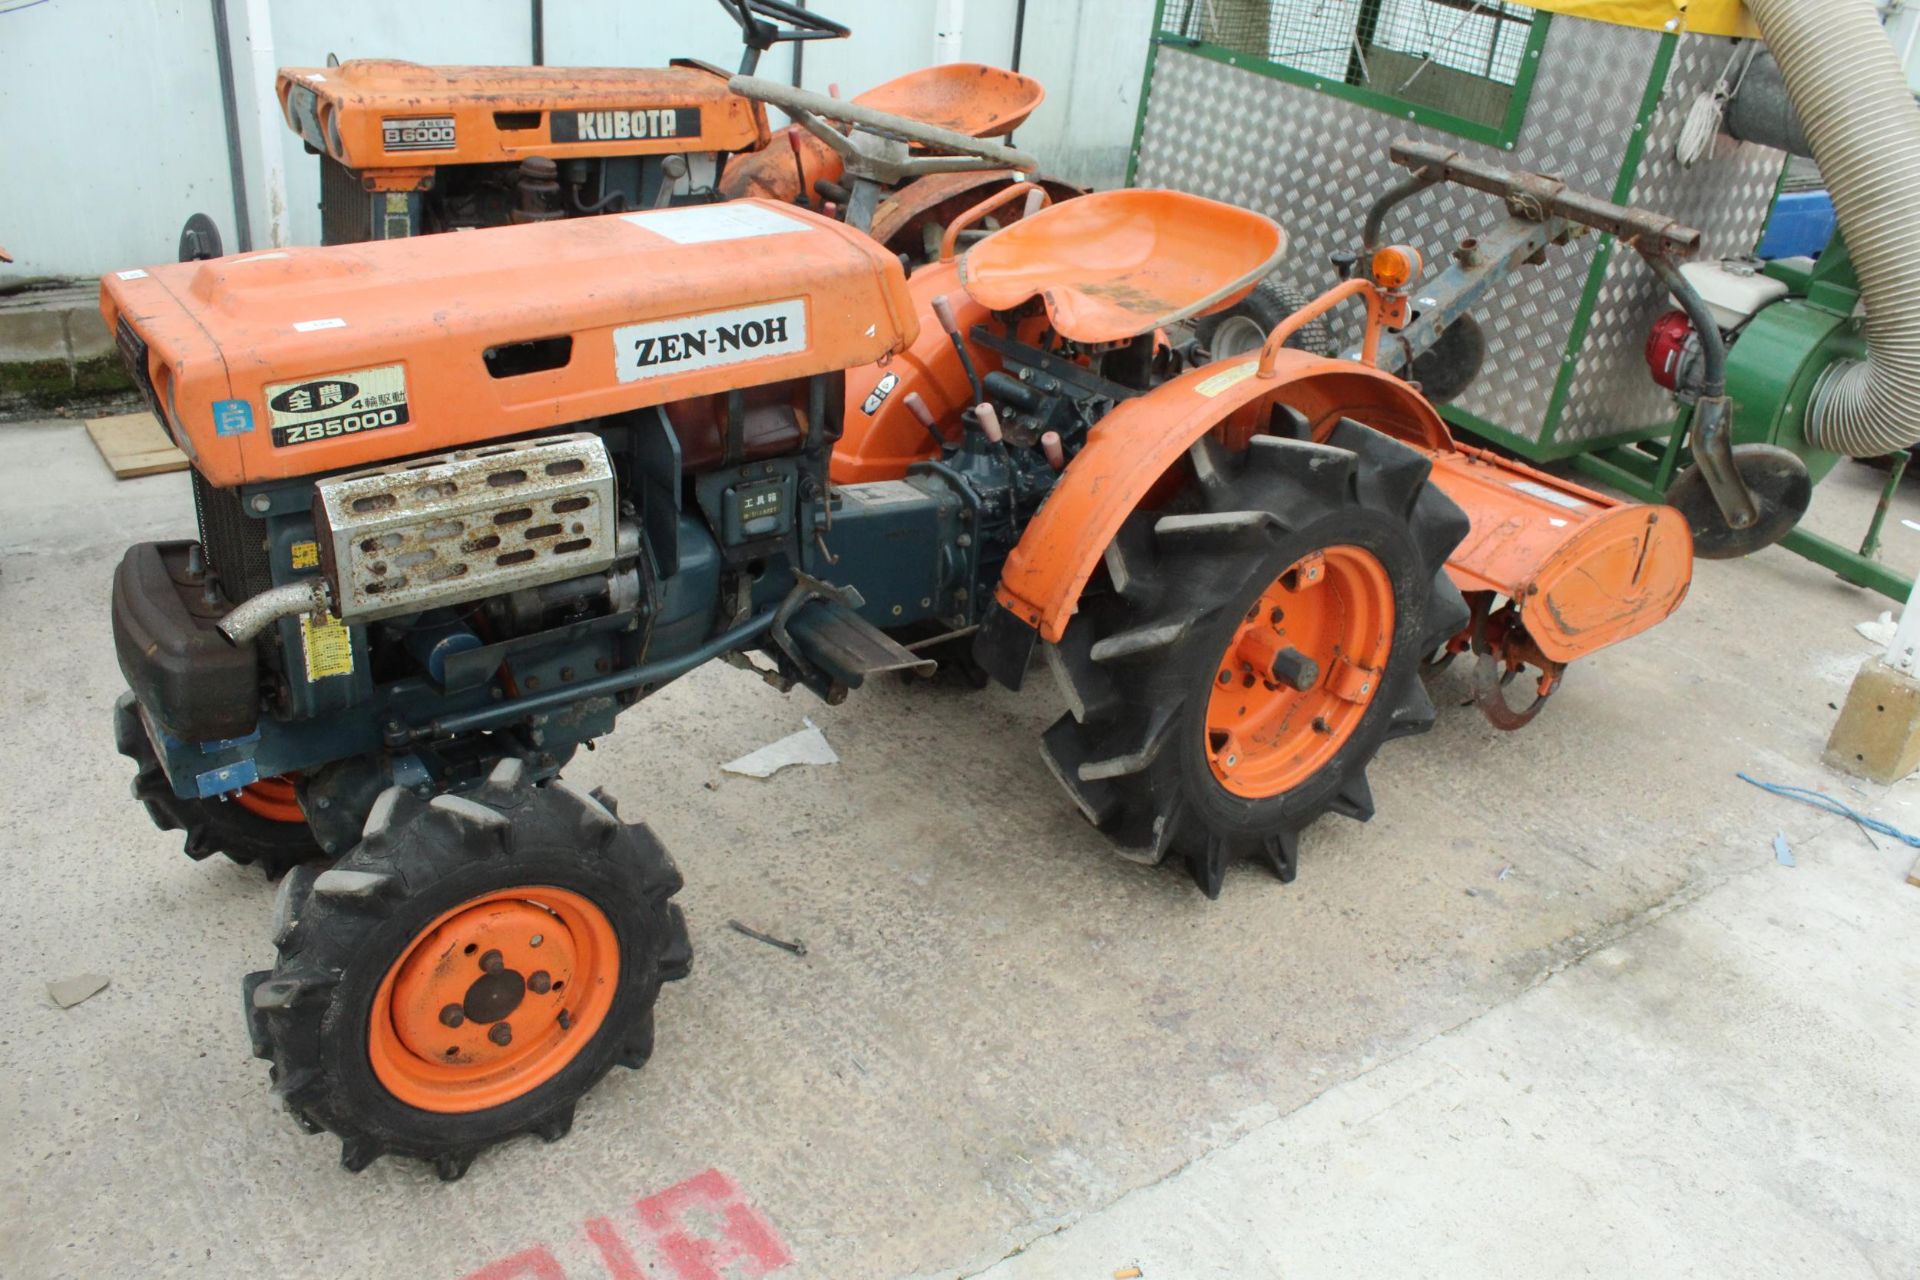 ZEN-NOH ZB5000 4X4 TRACTOR VERY ORIGINAL ALL IN WORKING ORDER COMPLETE WITH ROTOVATOR THE VENDOR